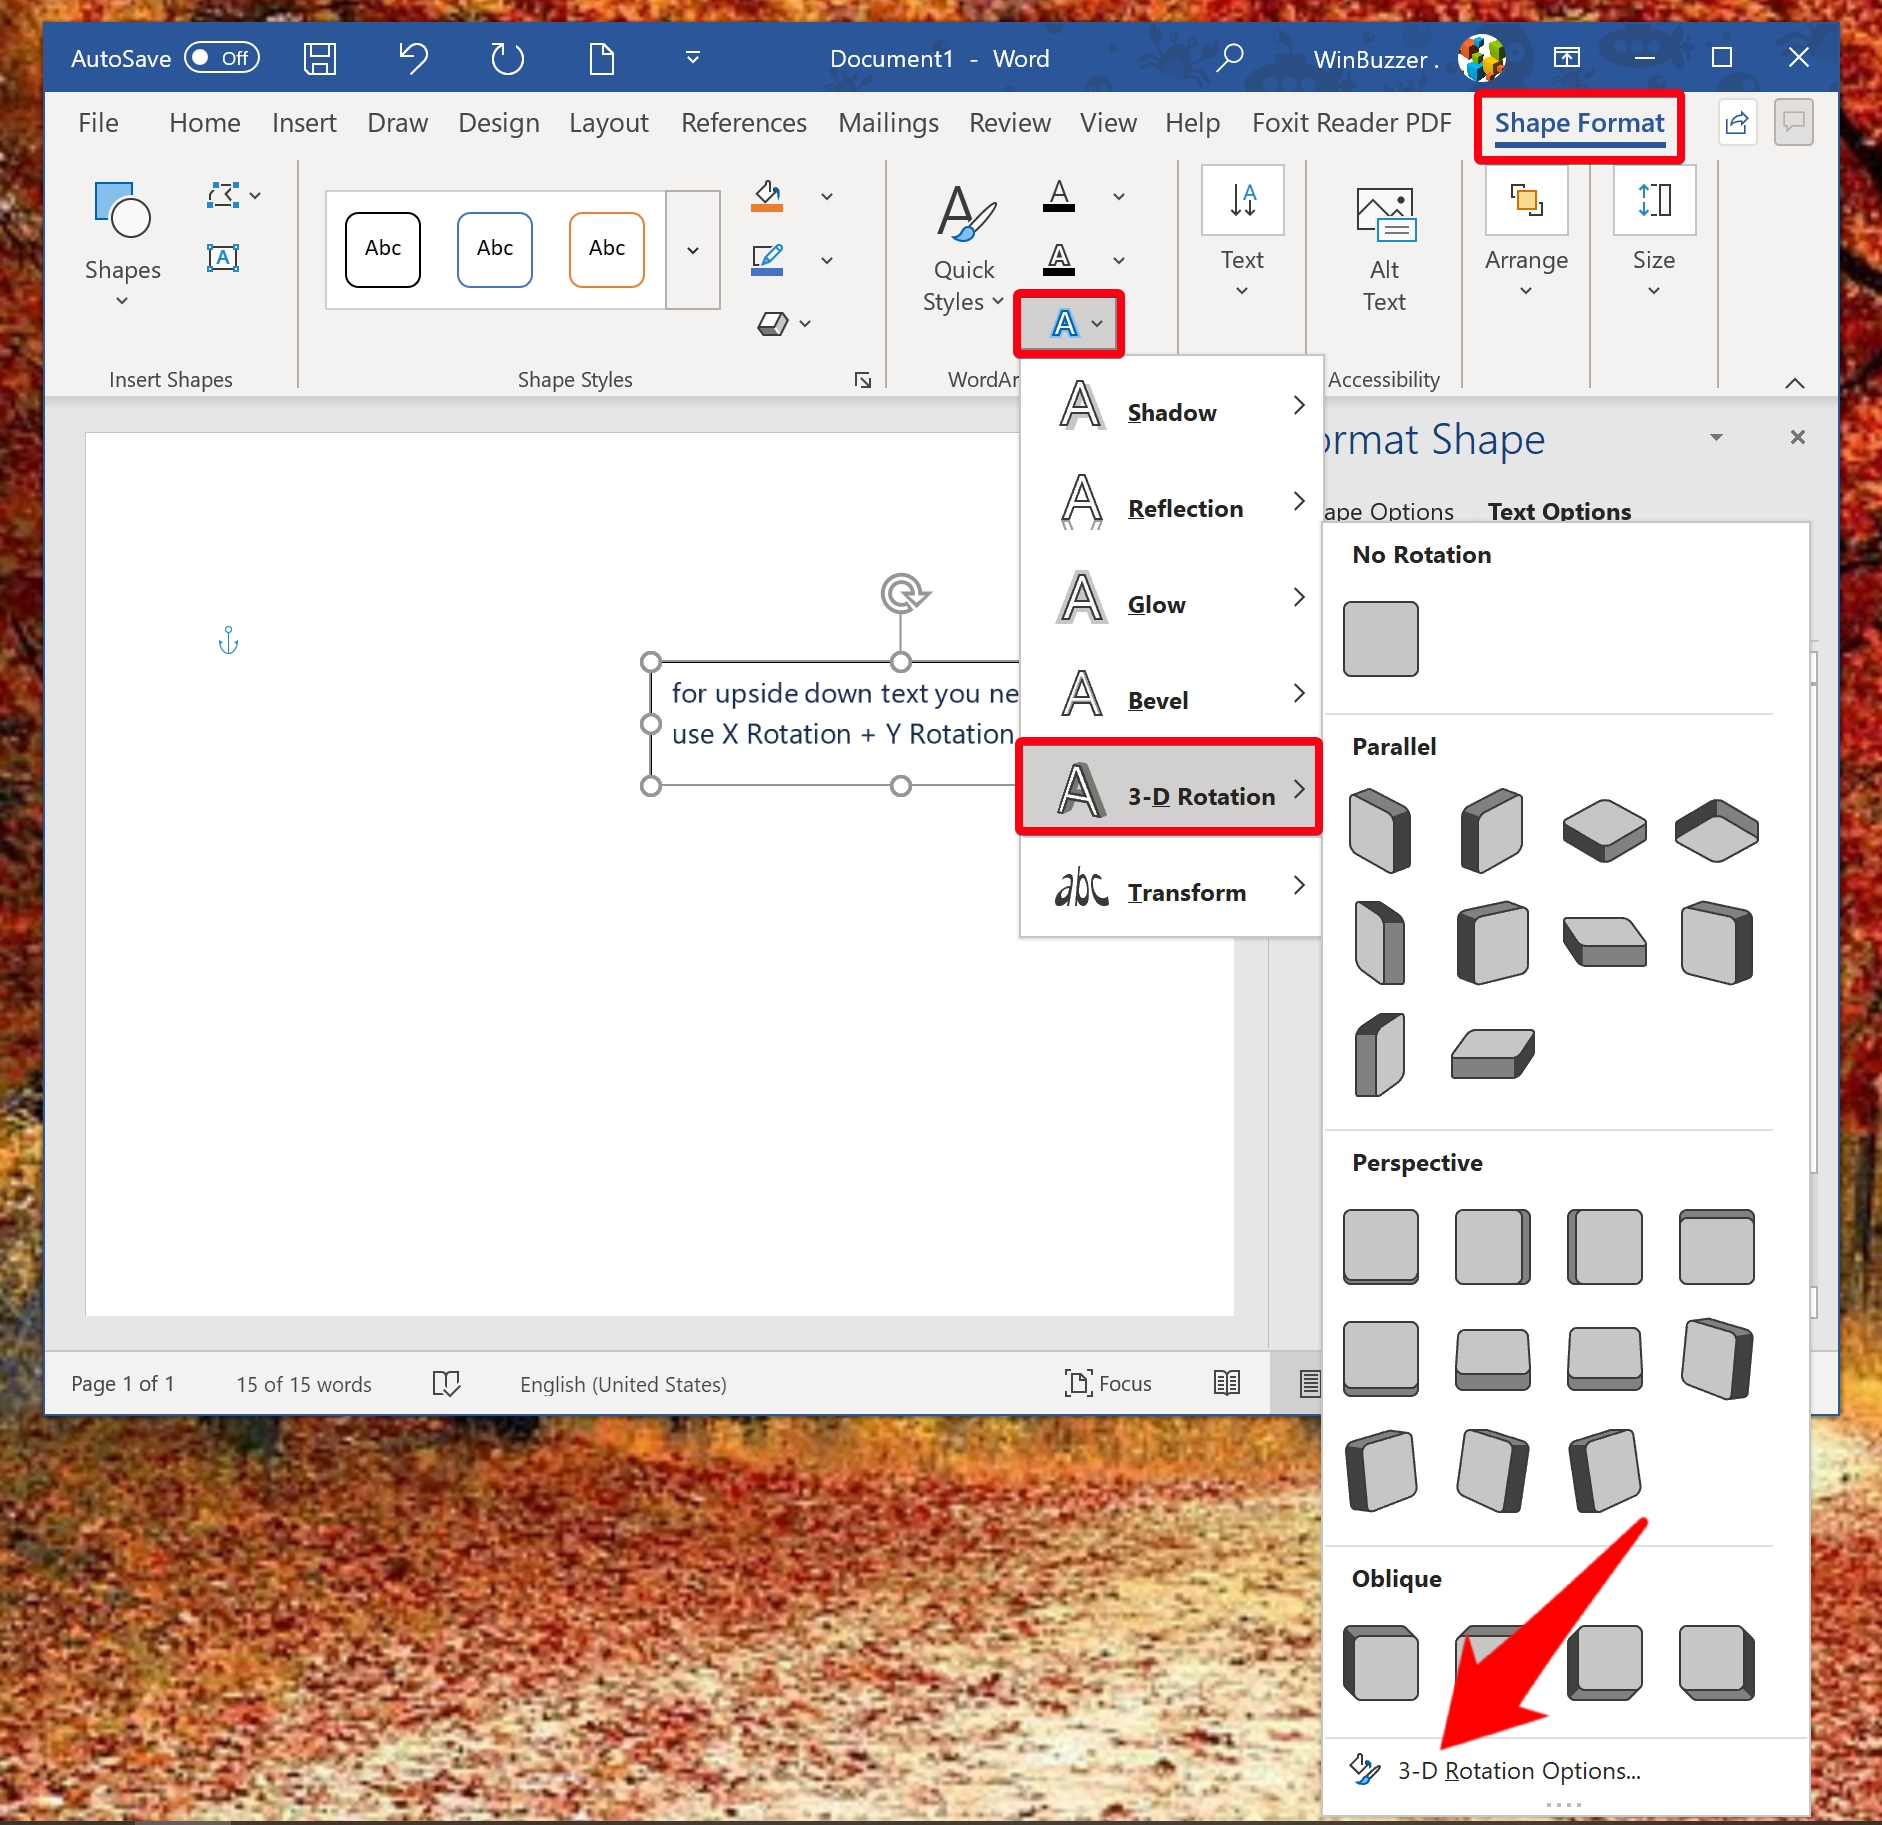 Windows 10 - Word - Text Box - Shape Format - Text Effects - 3-D Rotation Options